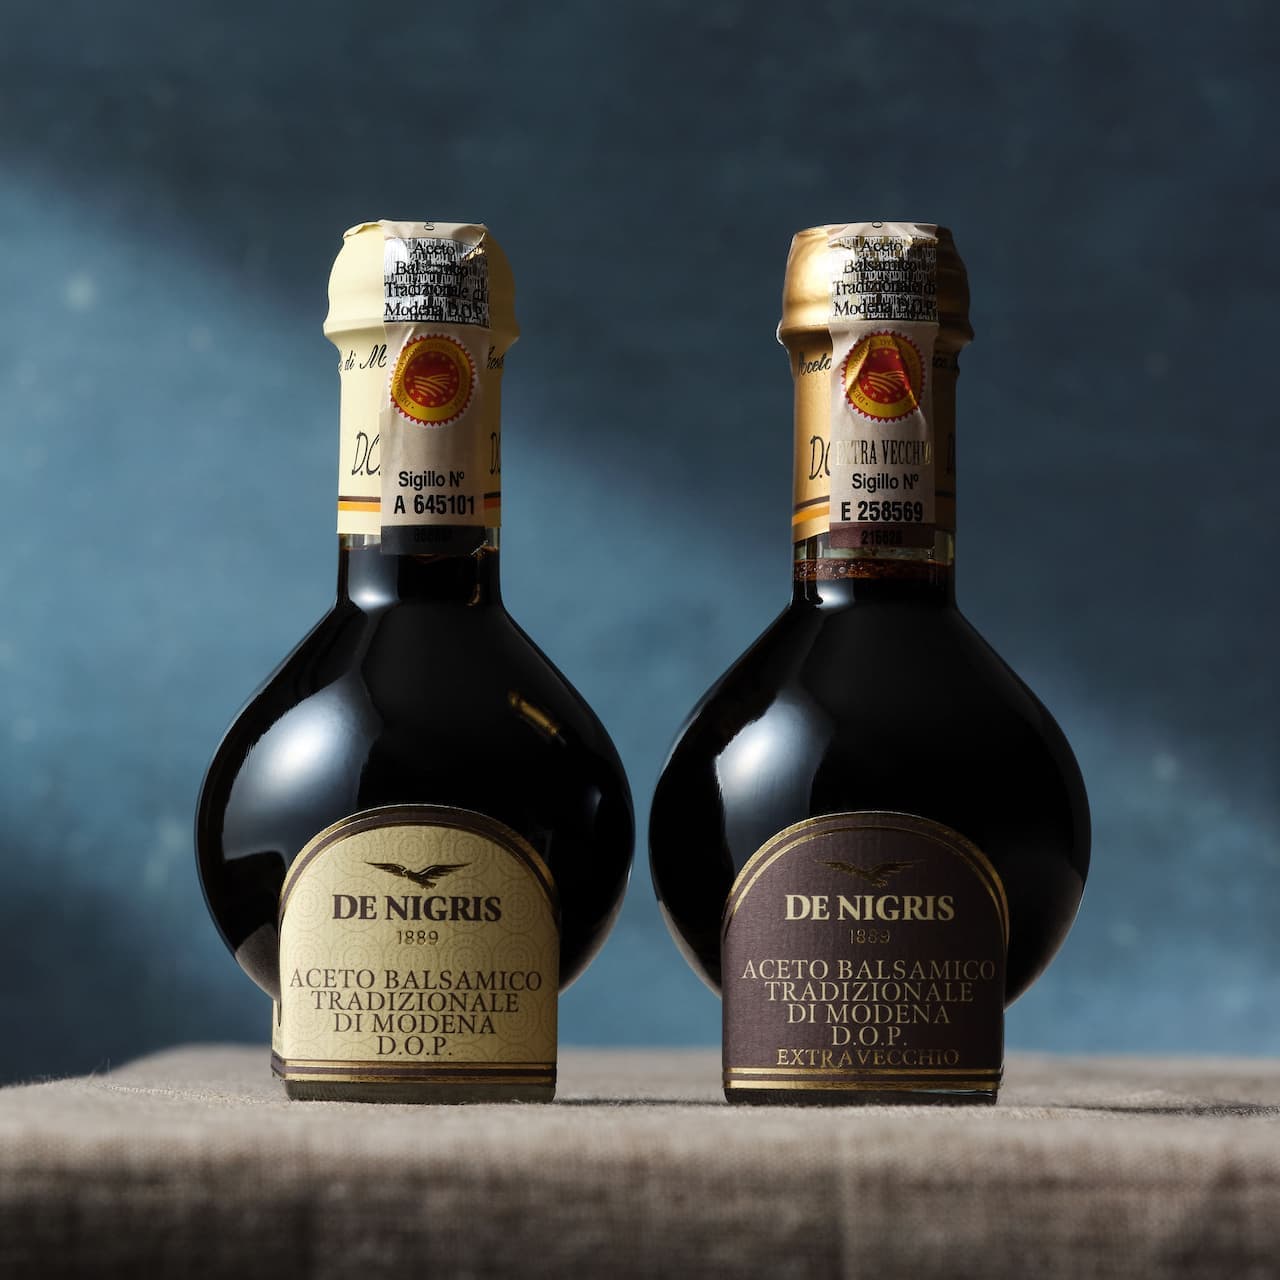 Two types of "Balsamic Vinegar" limited edition products from the official KALDI online store